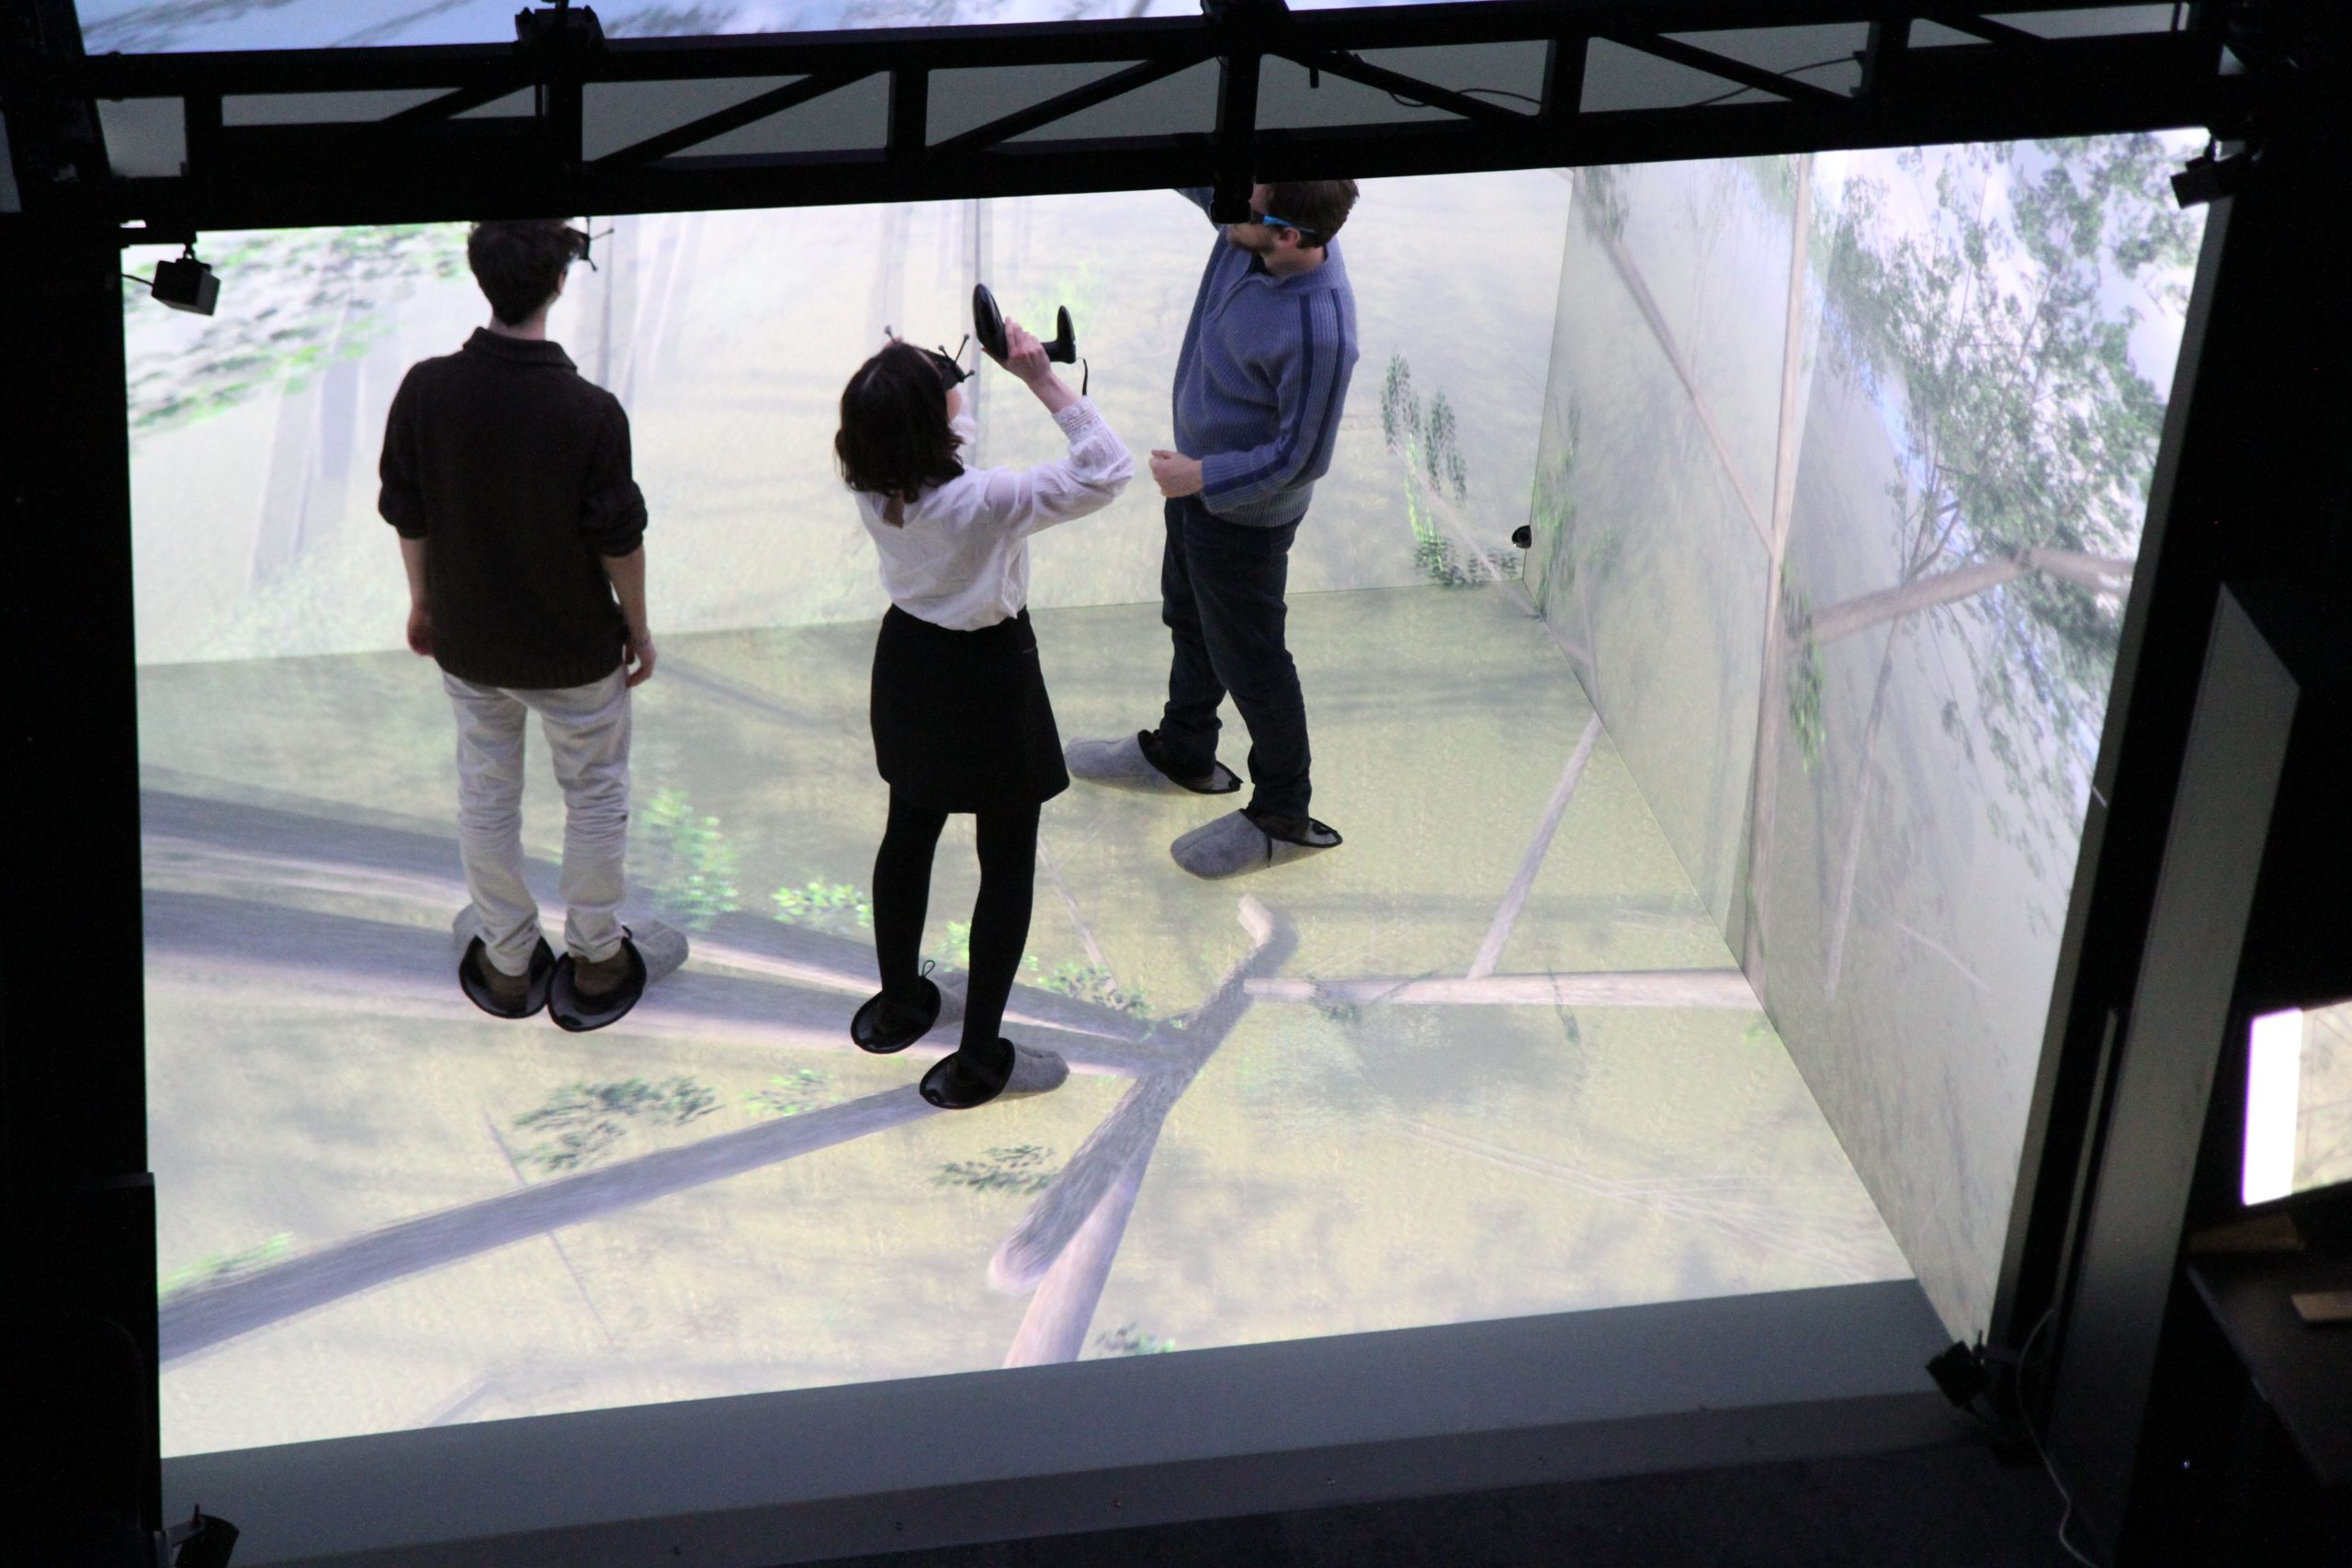 French Engineering School with Virtual Reality Immersion Room